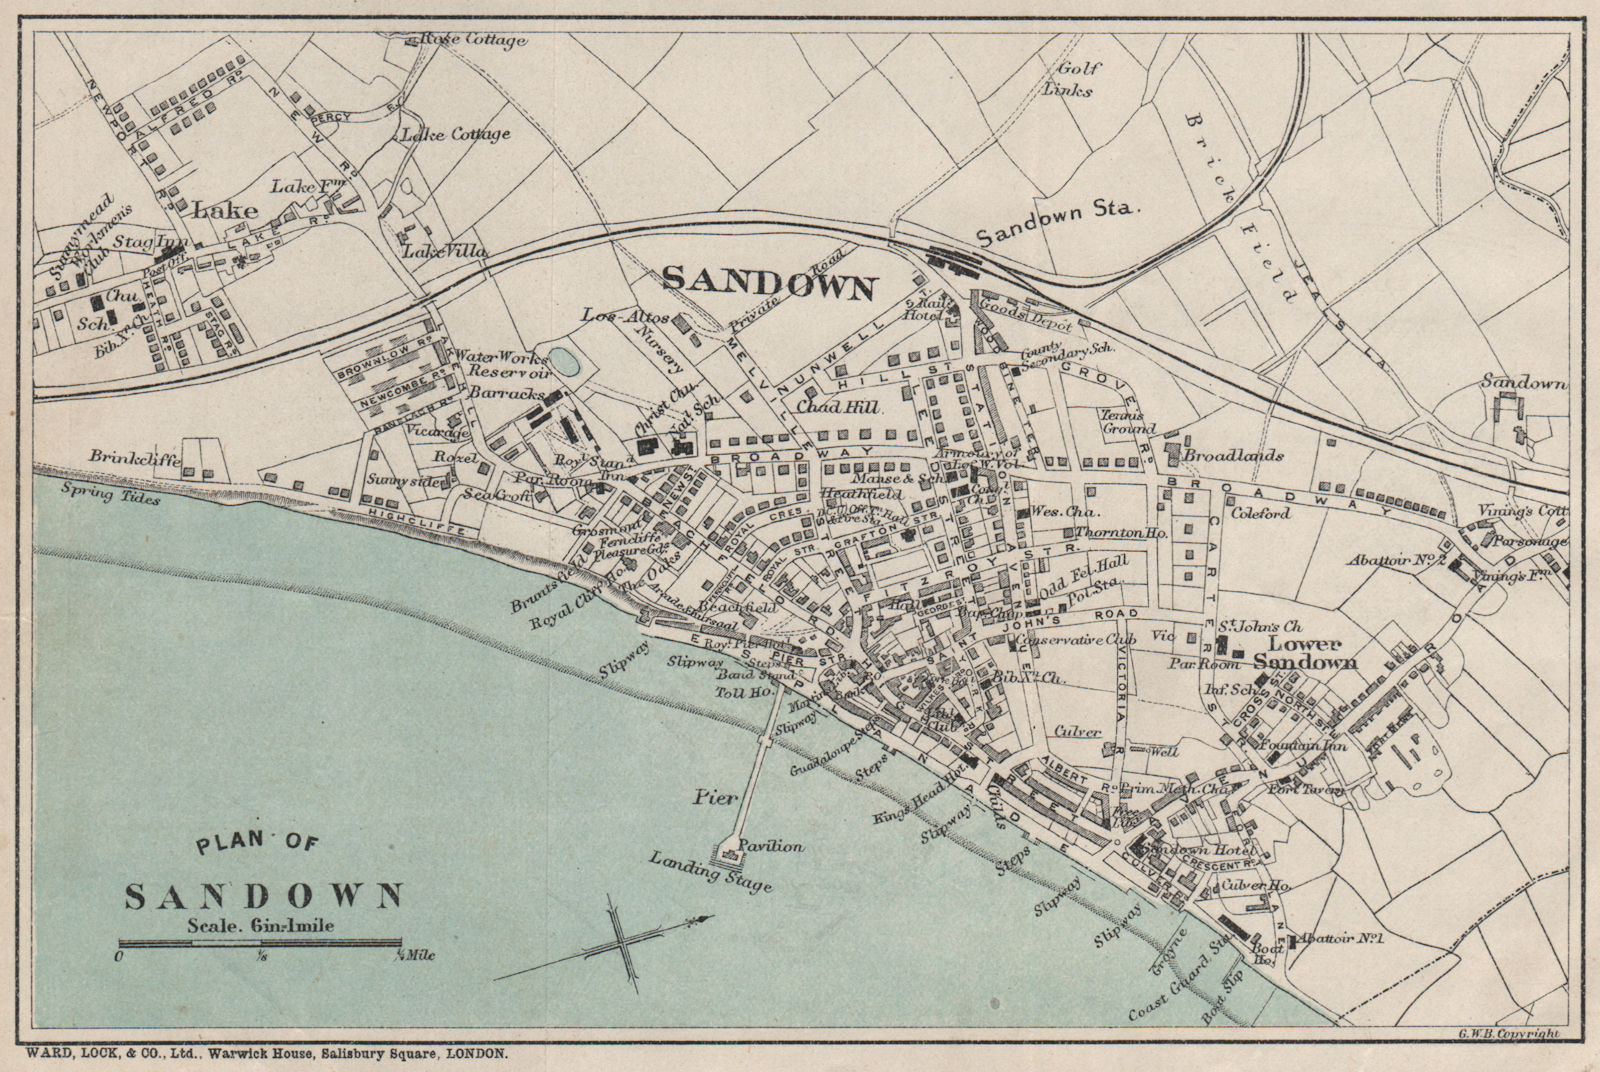 Associate Product SANDOWN vintage town/city plan. Isle of Wight. WARD LOCK 1908 old antique map